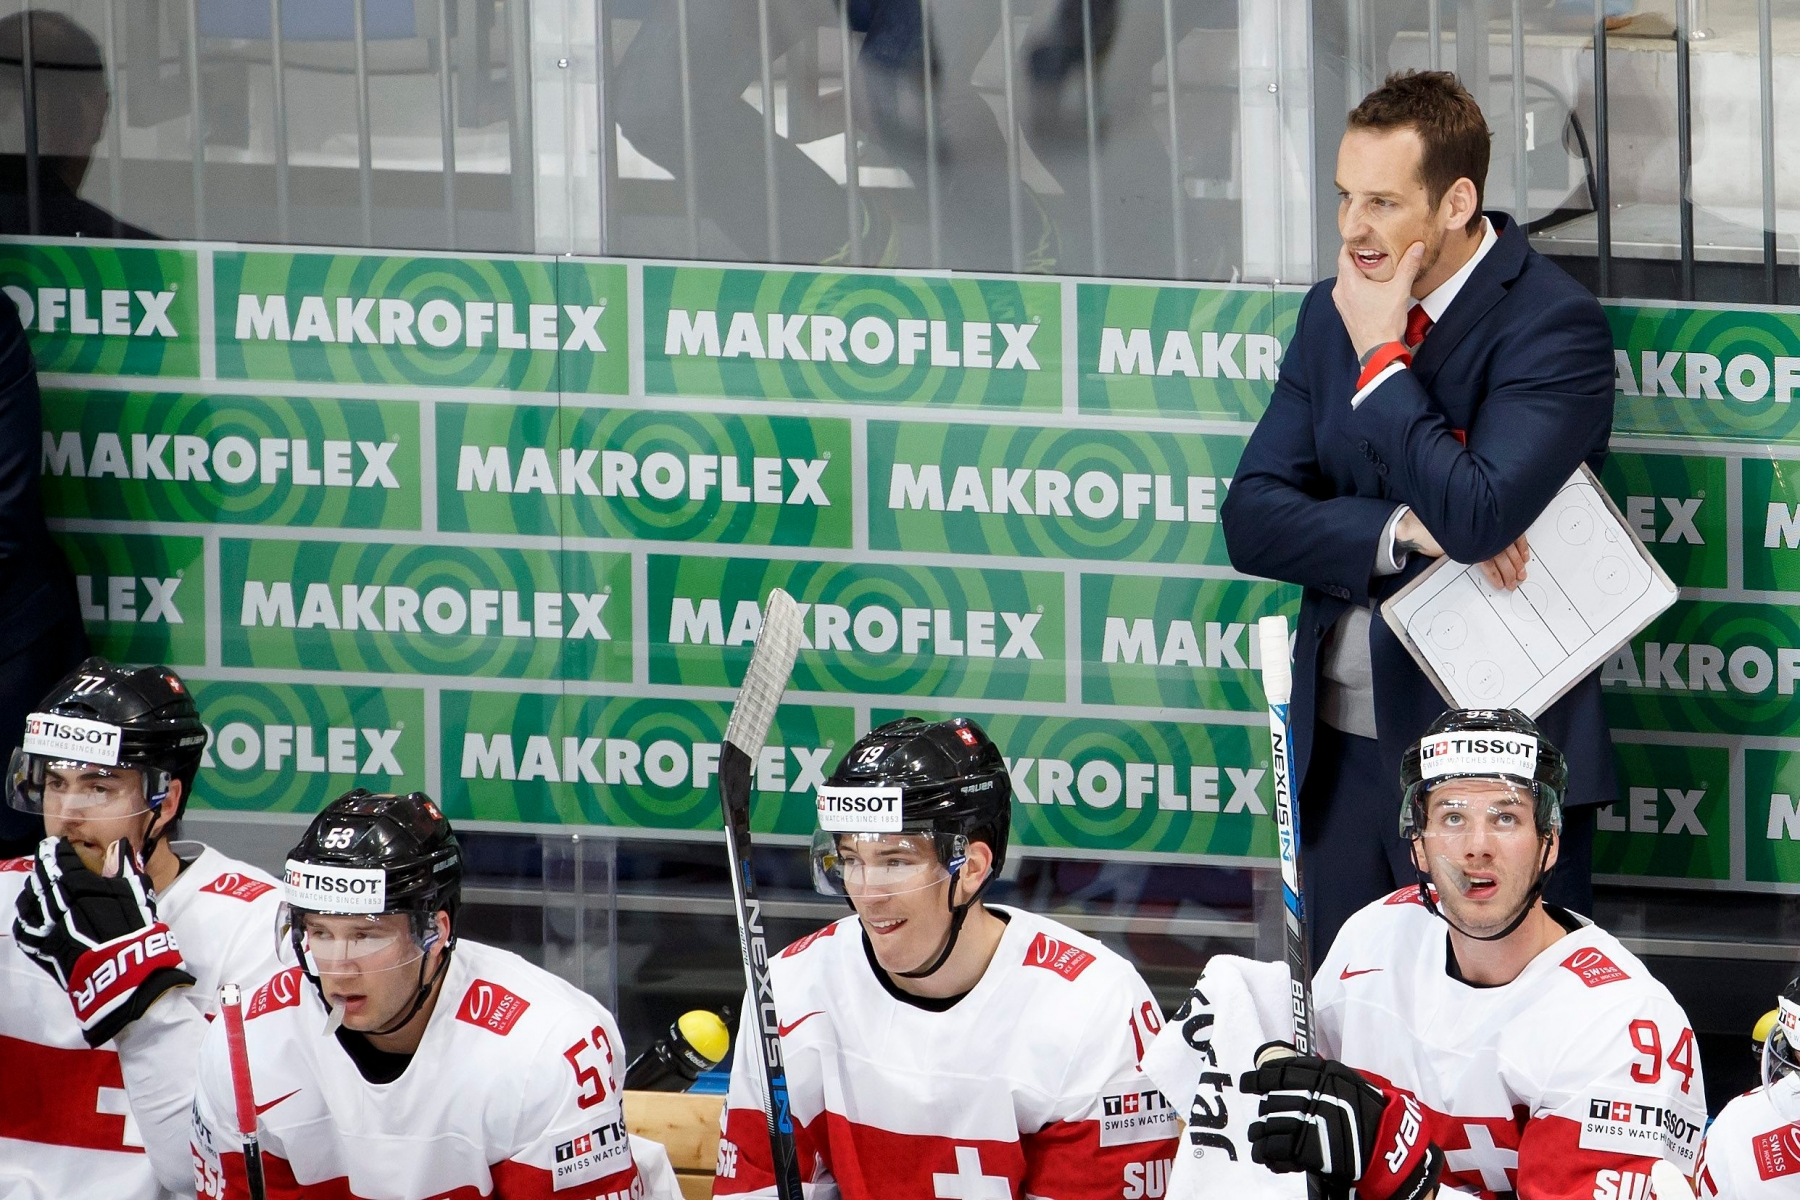 Patrick Fischer, head coach of Switzerland national ice hockey team, reacts, during the IIHF 2016 World Championship preliminary round game between Czech Republic and Switzerland, at the Ice Palace, in Moscow, Russia, Tuesday, May 17, 2016. (KEYSTONE/Salvatore Di Nolfi) RUSSIA ICE HOCKEY IIHF WC 2016 CZE CHE